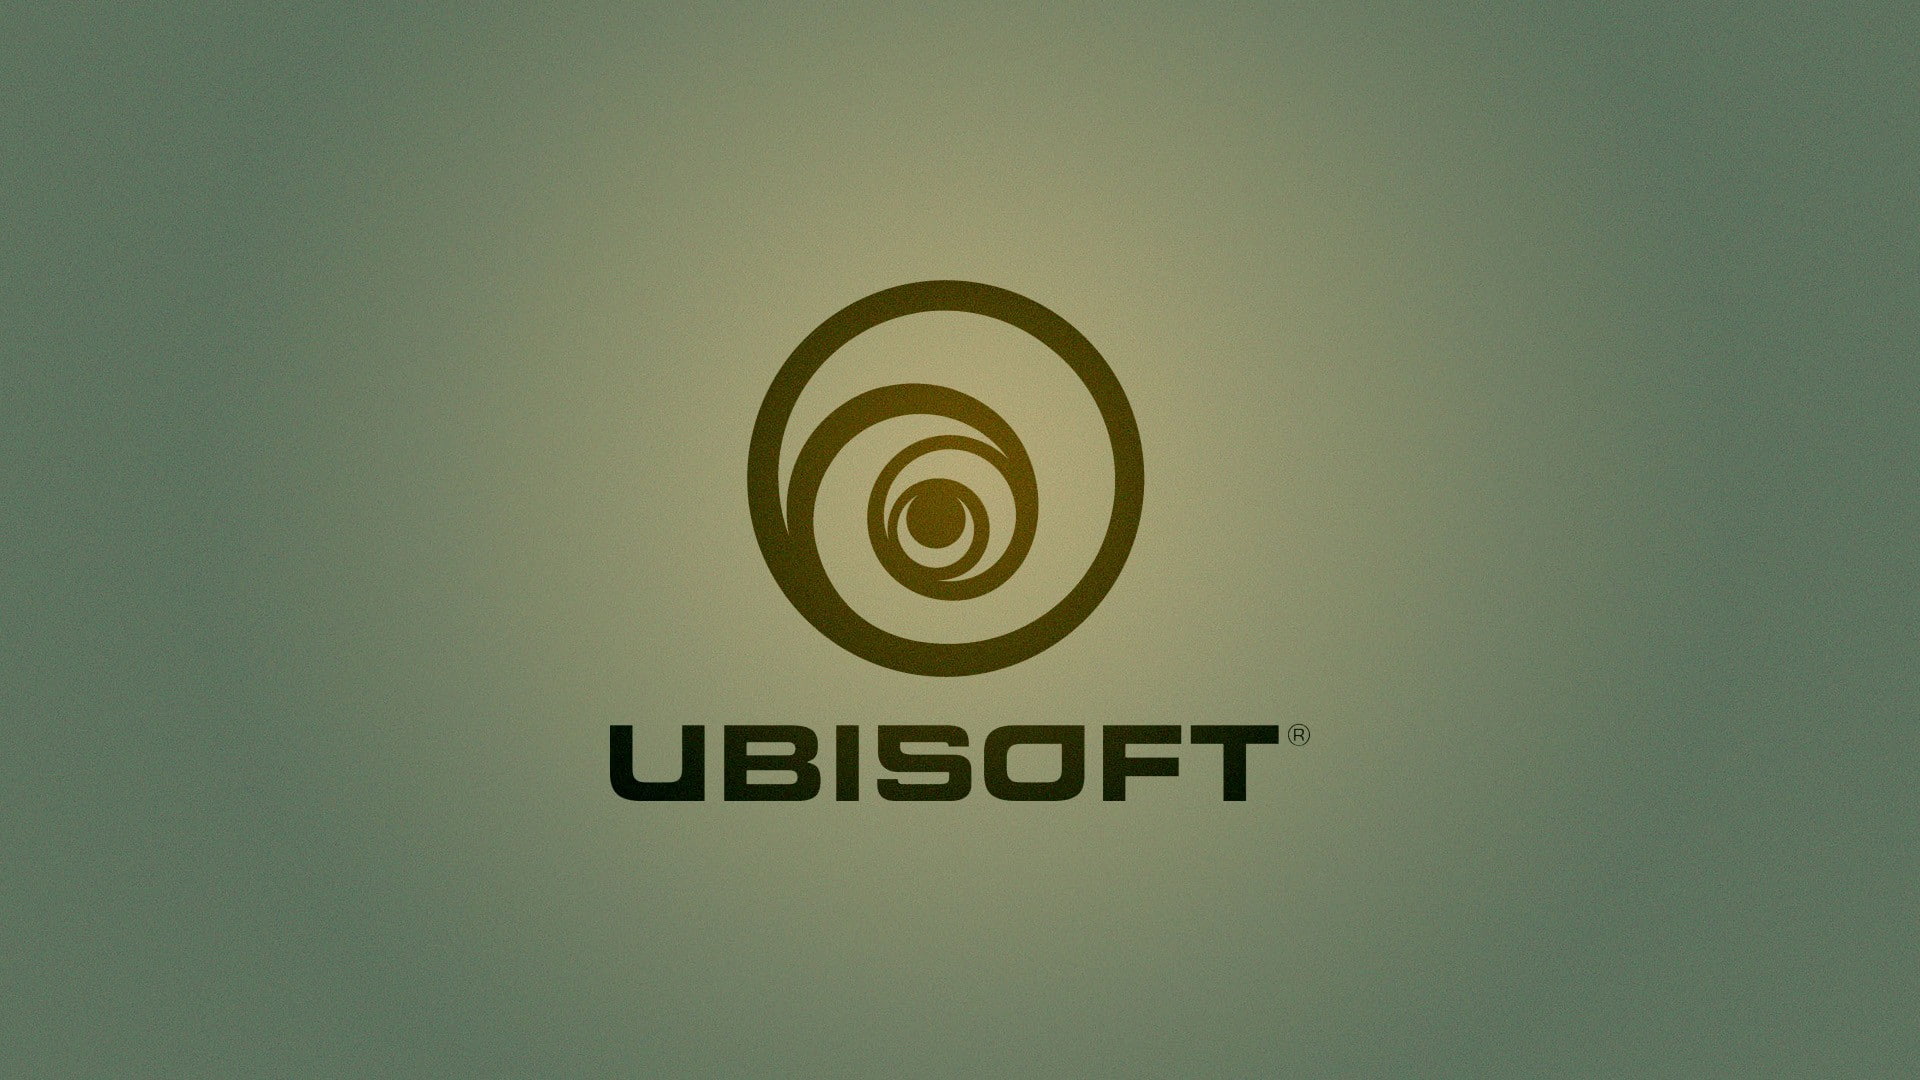 Ubisoft, PC gaming, text, communication, western script, indoors